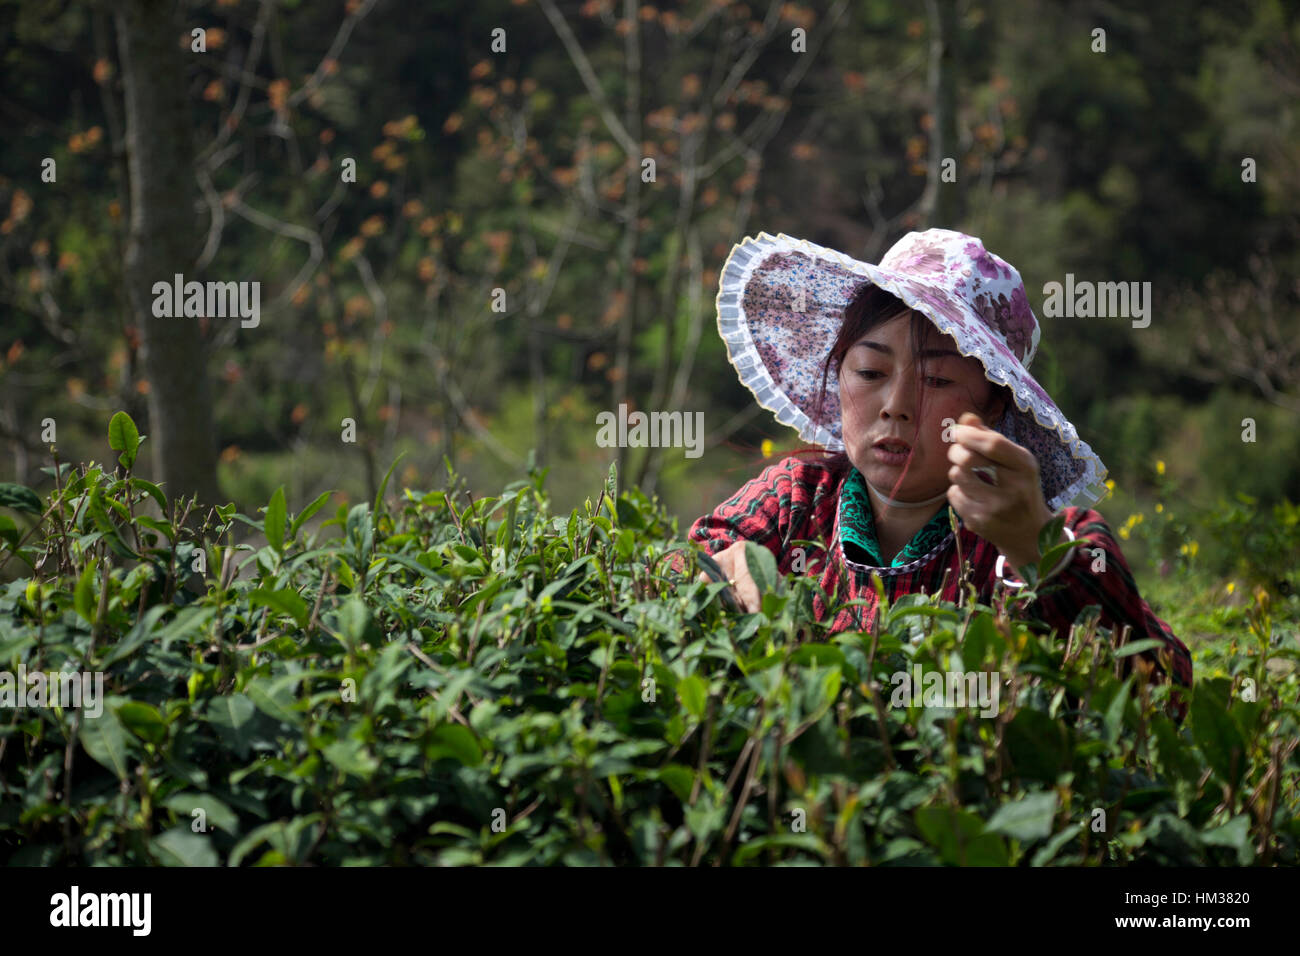 A woman picks tender tea buds during the first tea harvest of the year during Qing Ming festival in Sichuan in China. Stock Photo